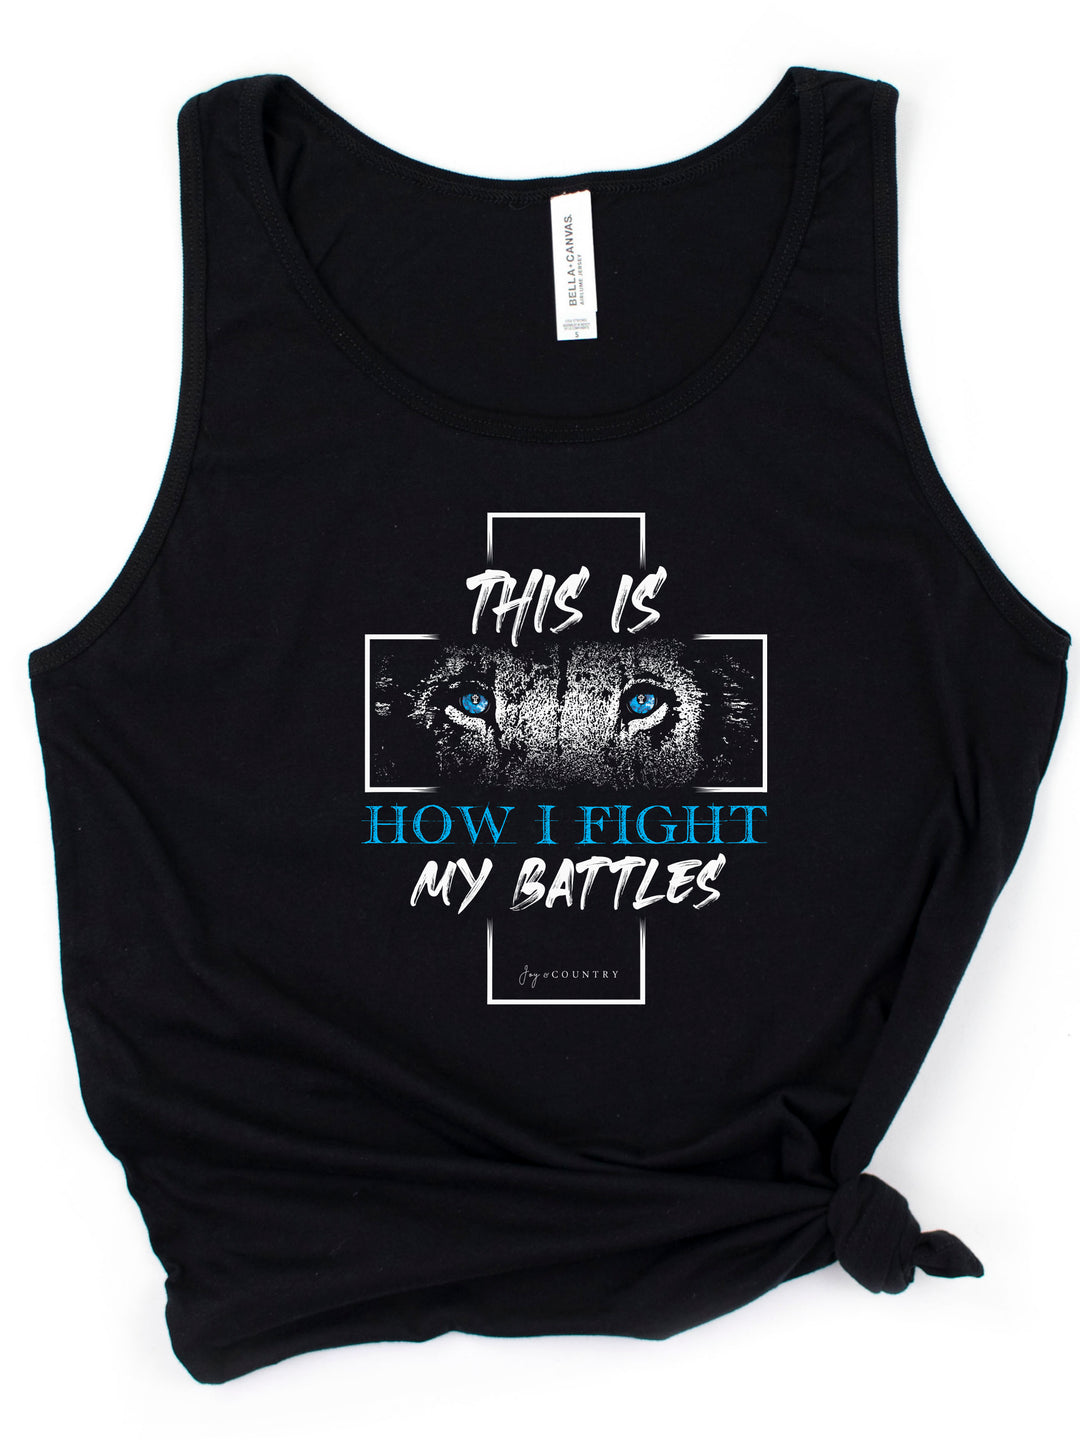 This is How I Fight My Battles - Unisex Jersey Tank Top - Joy & Country